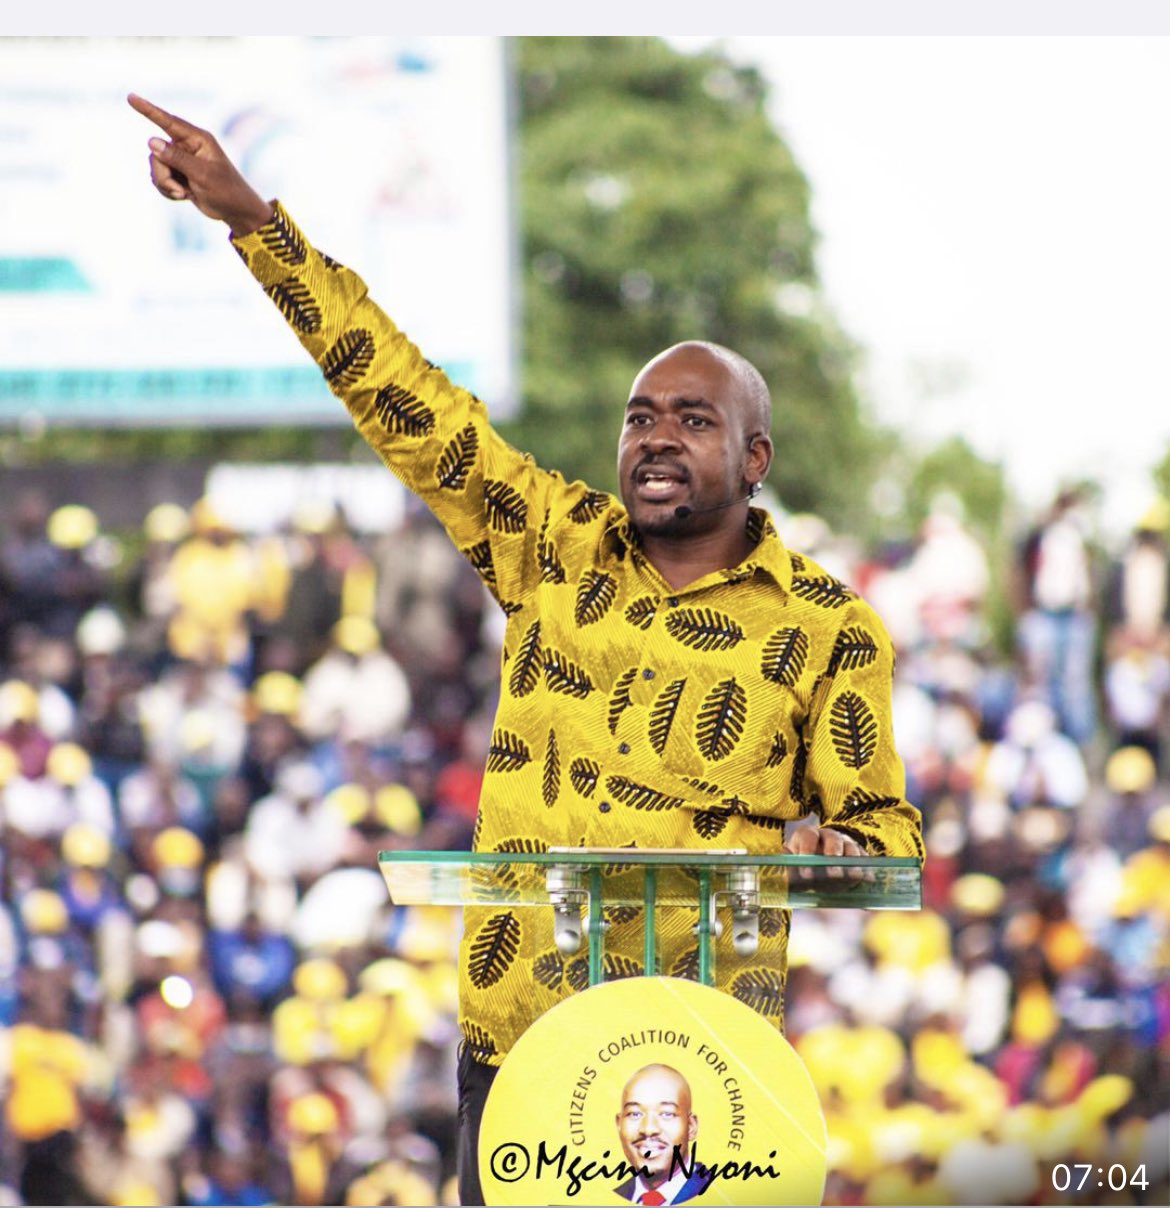 Get Ready For A New Zimbabwe, This Time It’s Happening: Chamisa